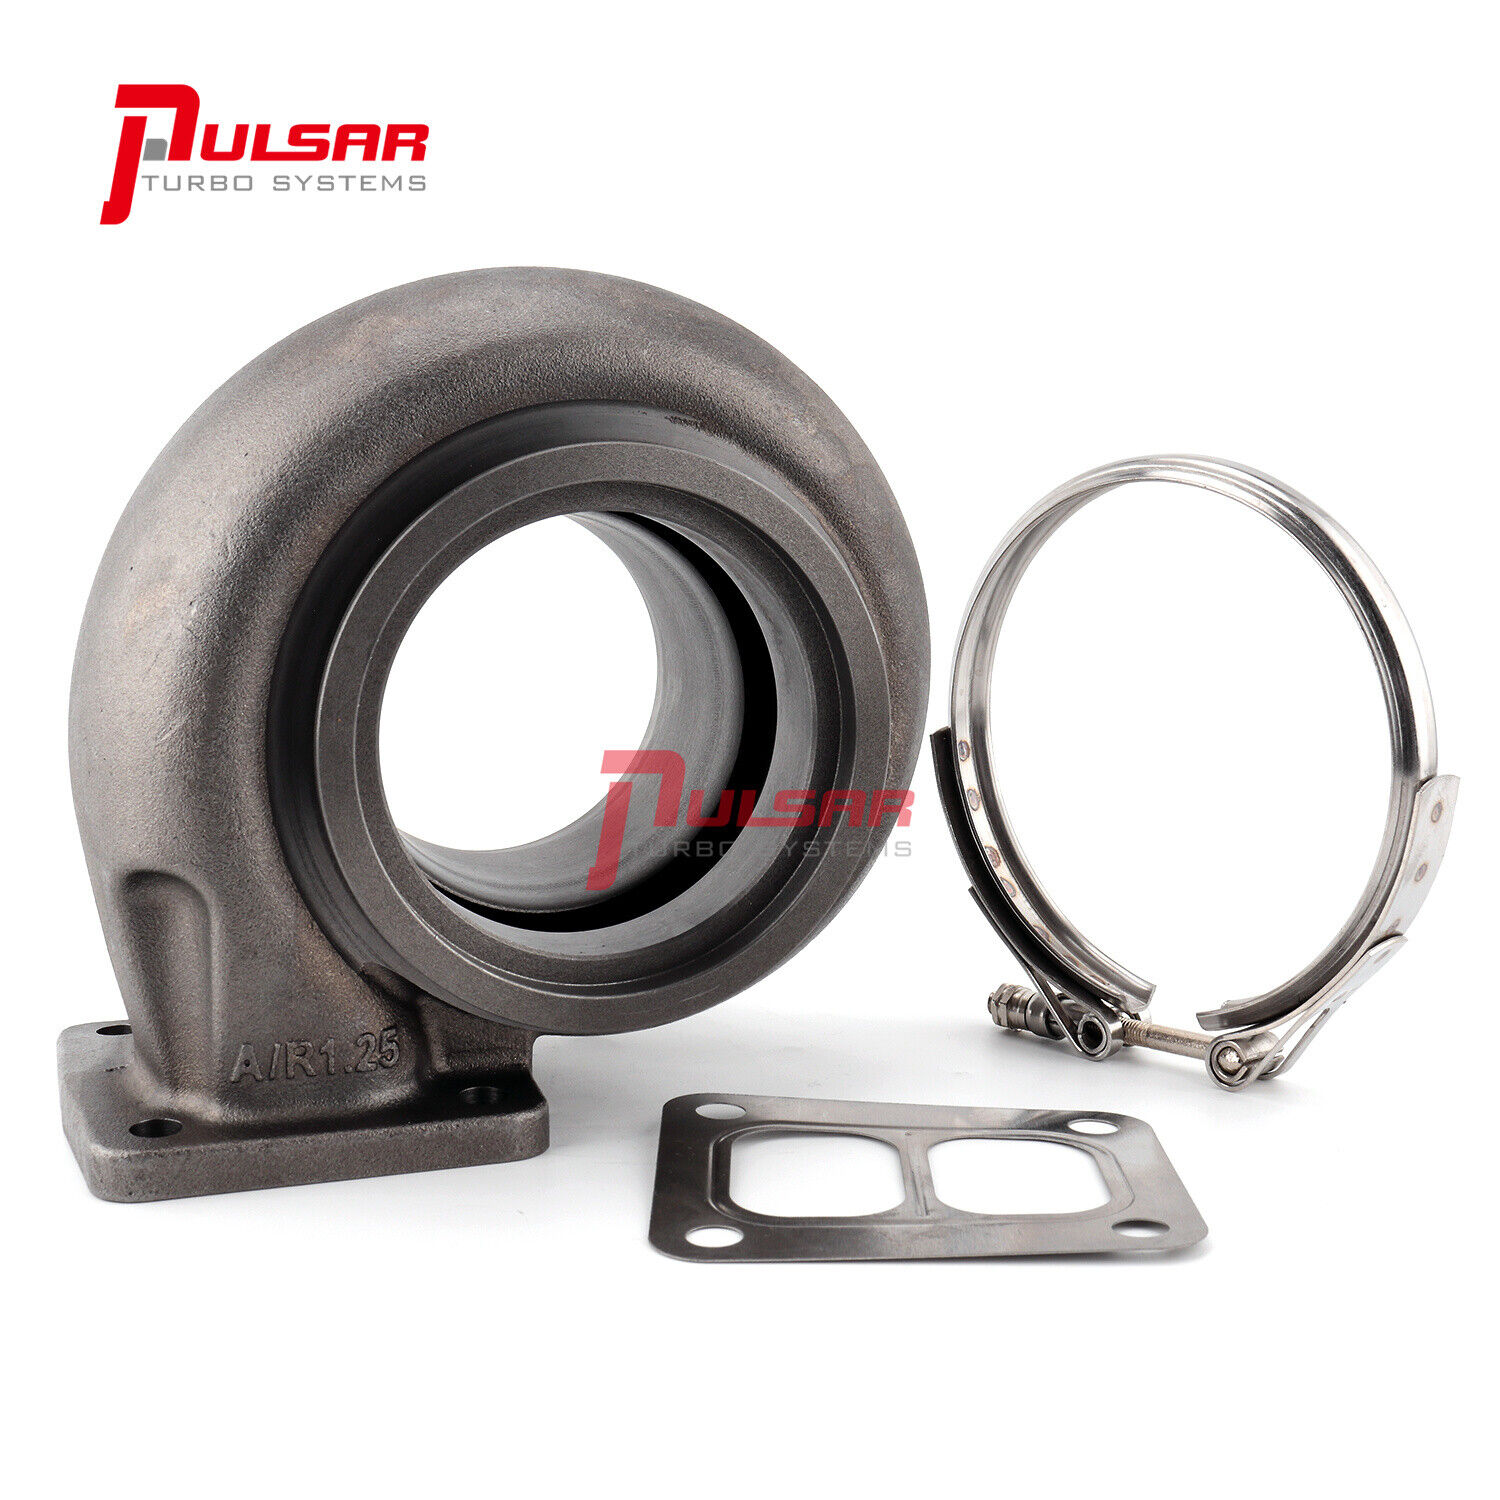 PSR T4 Divided, Vband 1.25A/R Turbine Housing for 400 Series Turbos with 96/88mm